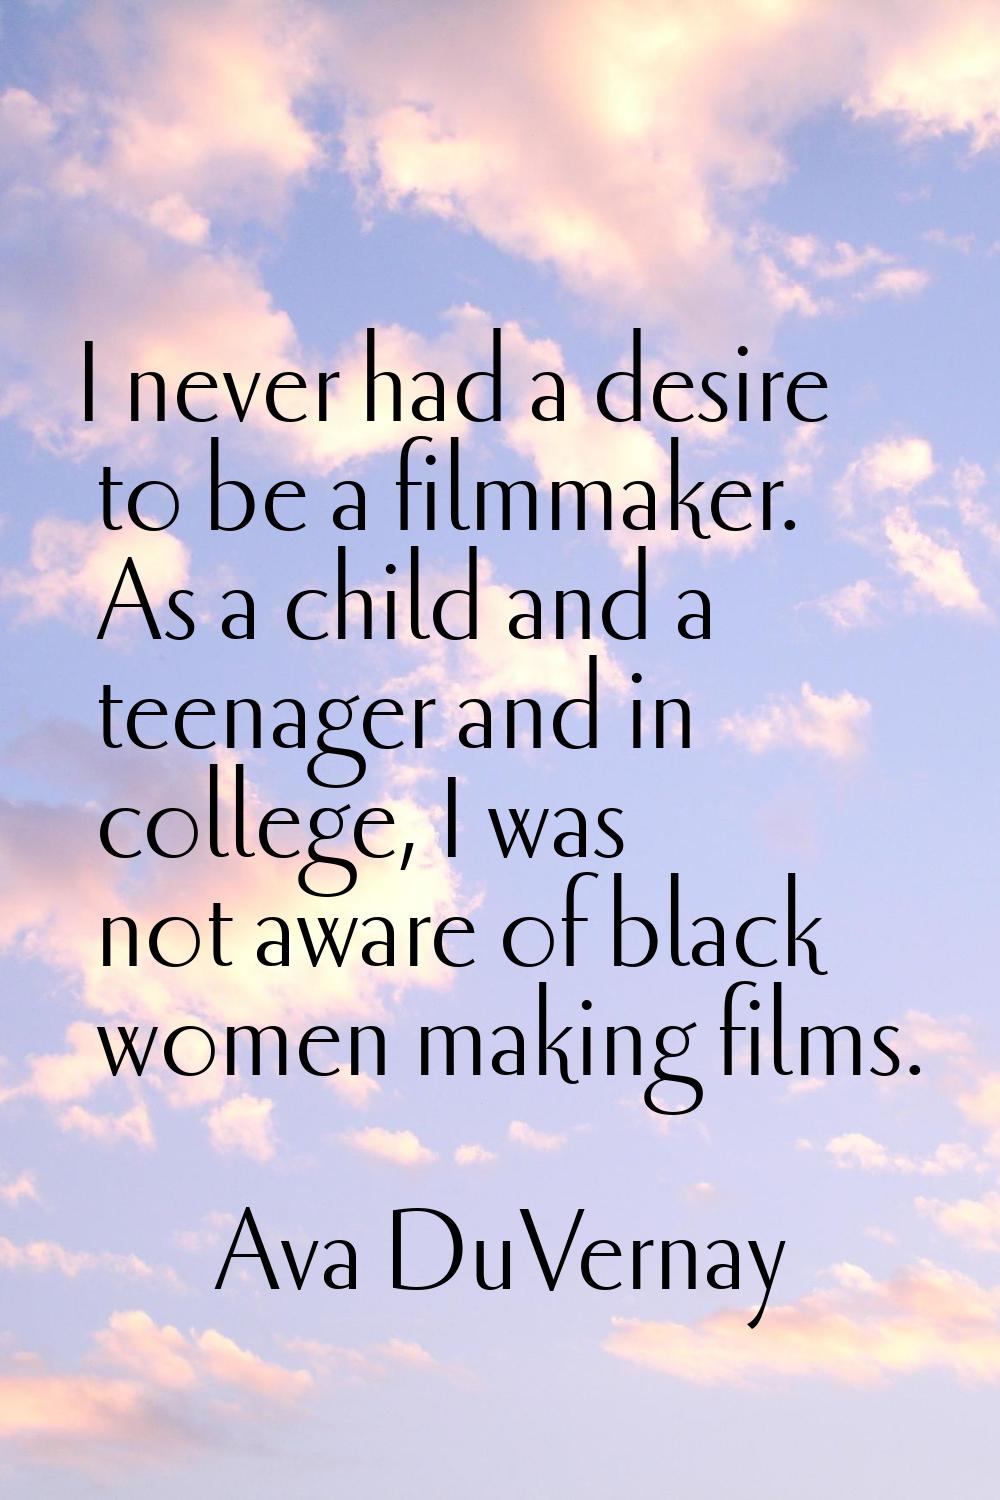 I never had a desire to be a filmmaker. As a child and a teenager and in college, I was not aware o